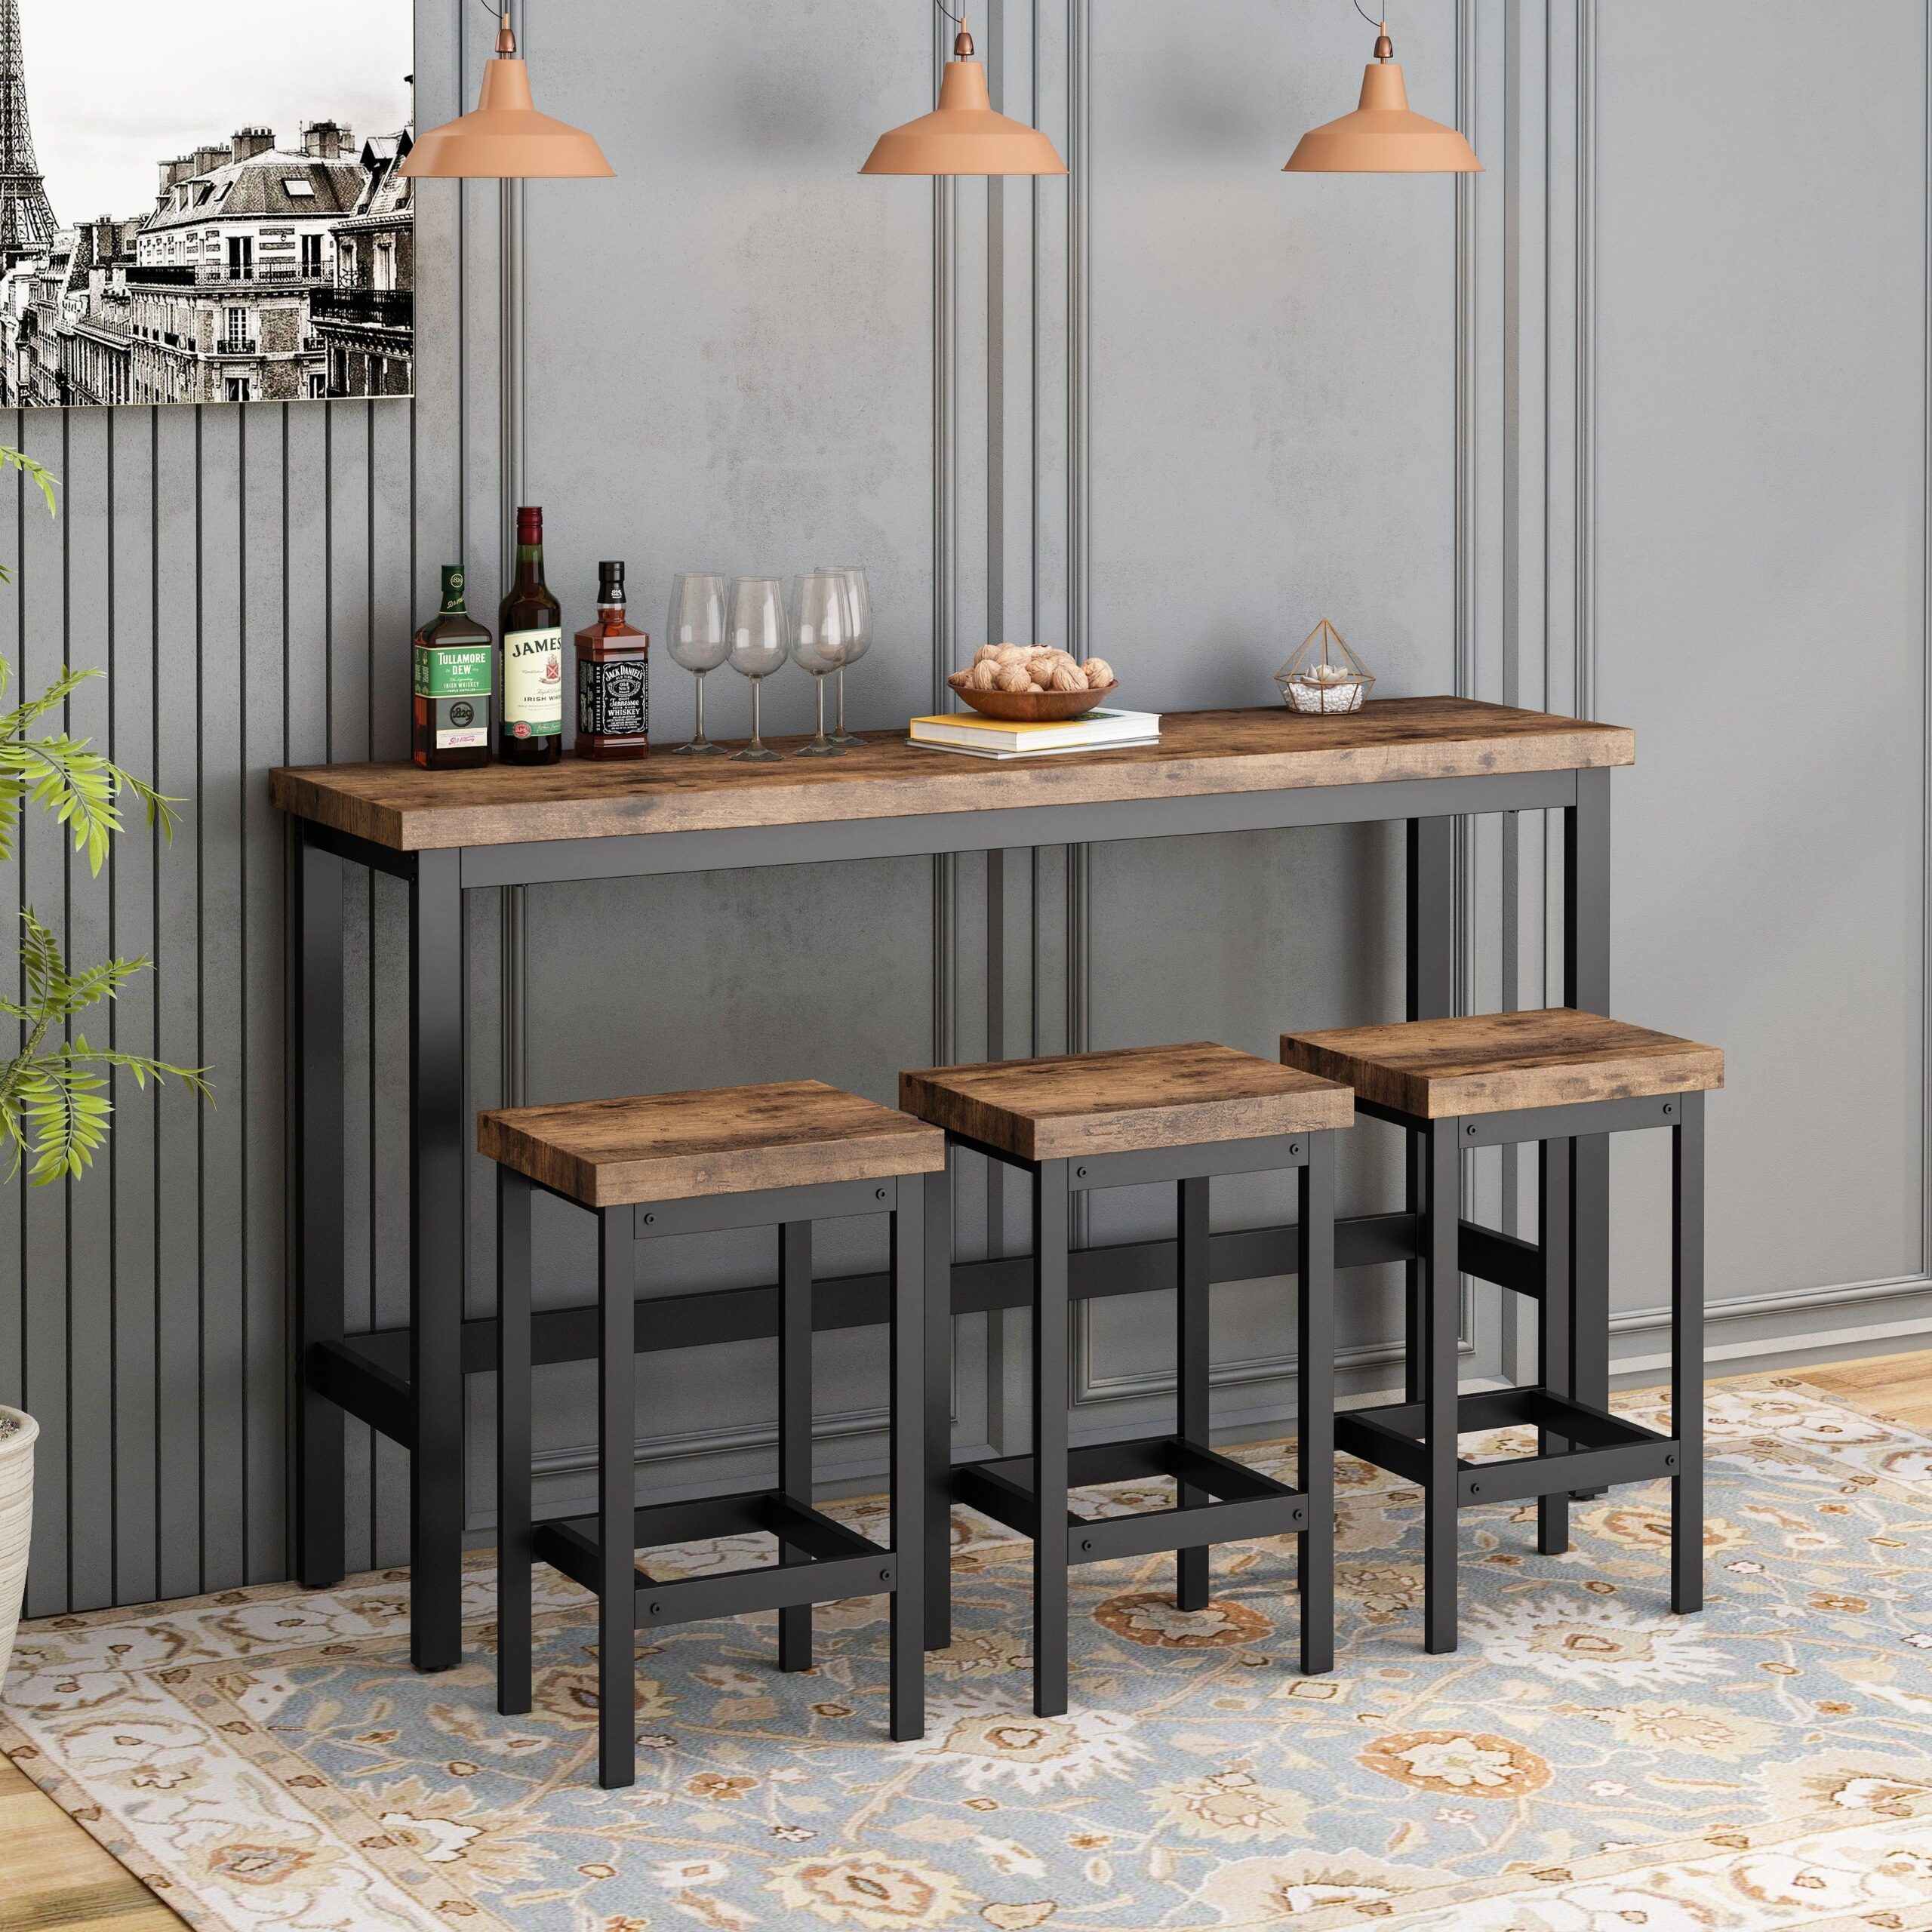 Elevate Your Dining Experience with a Stylish Counter Height Table